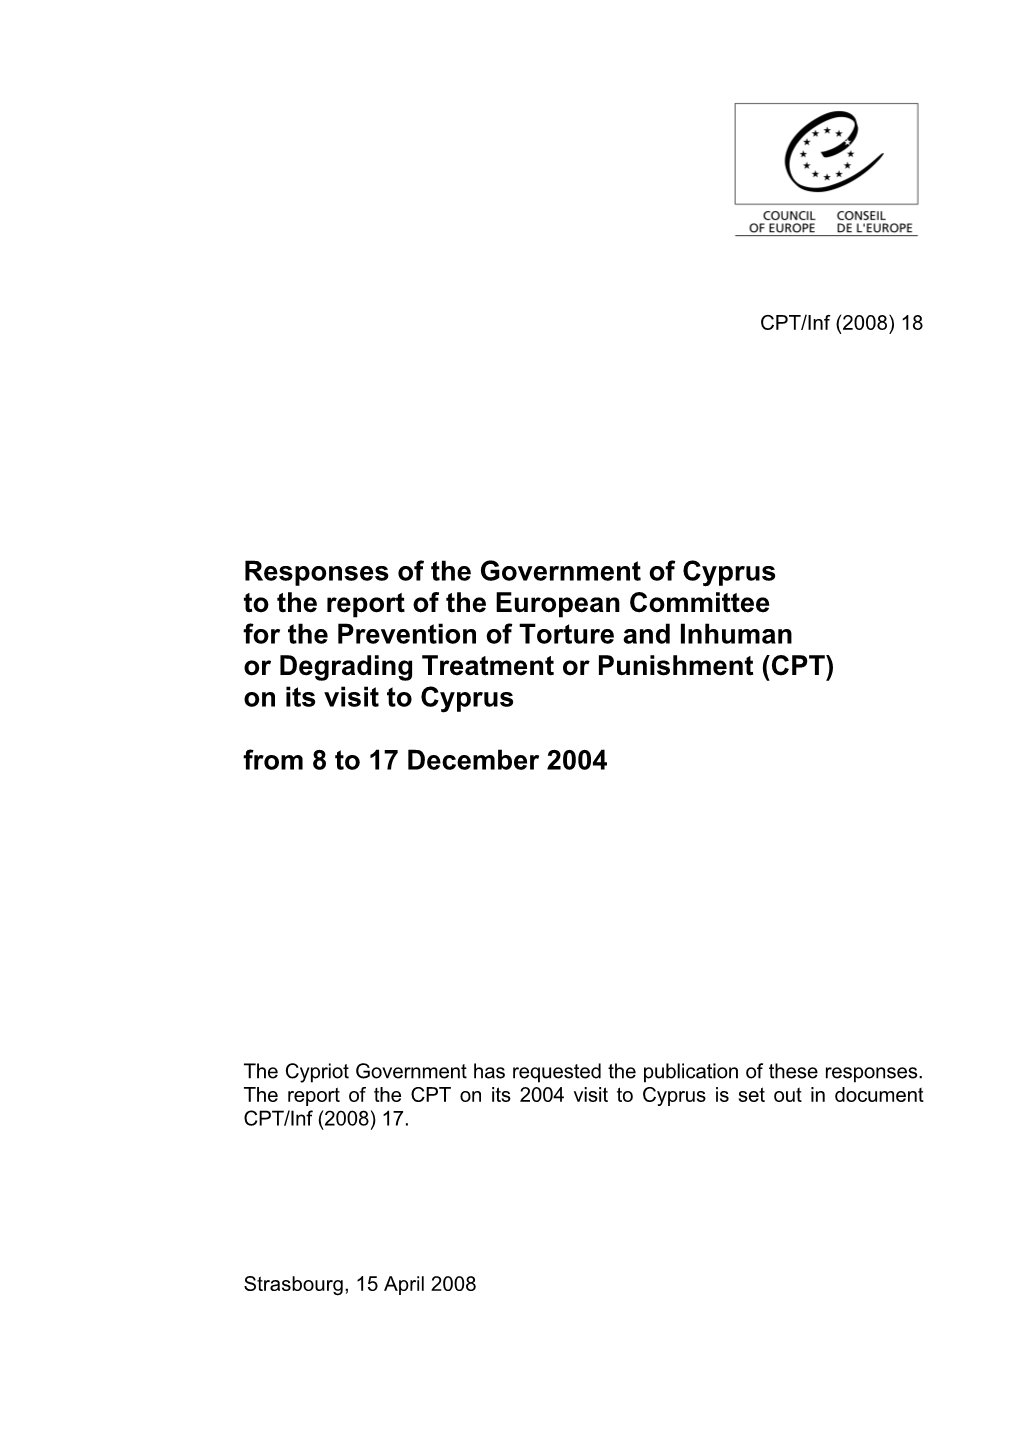 Responses of the Government of Cyprus to the Report of The